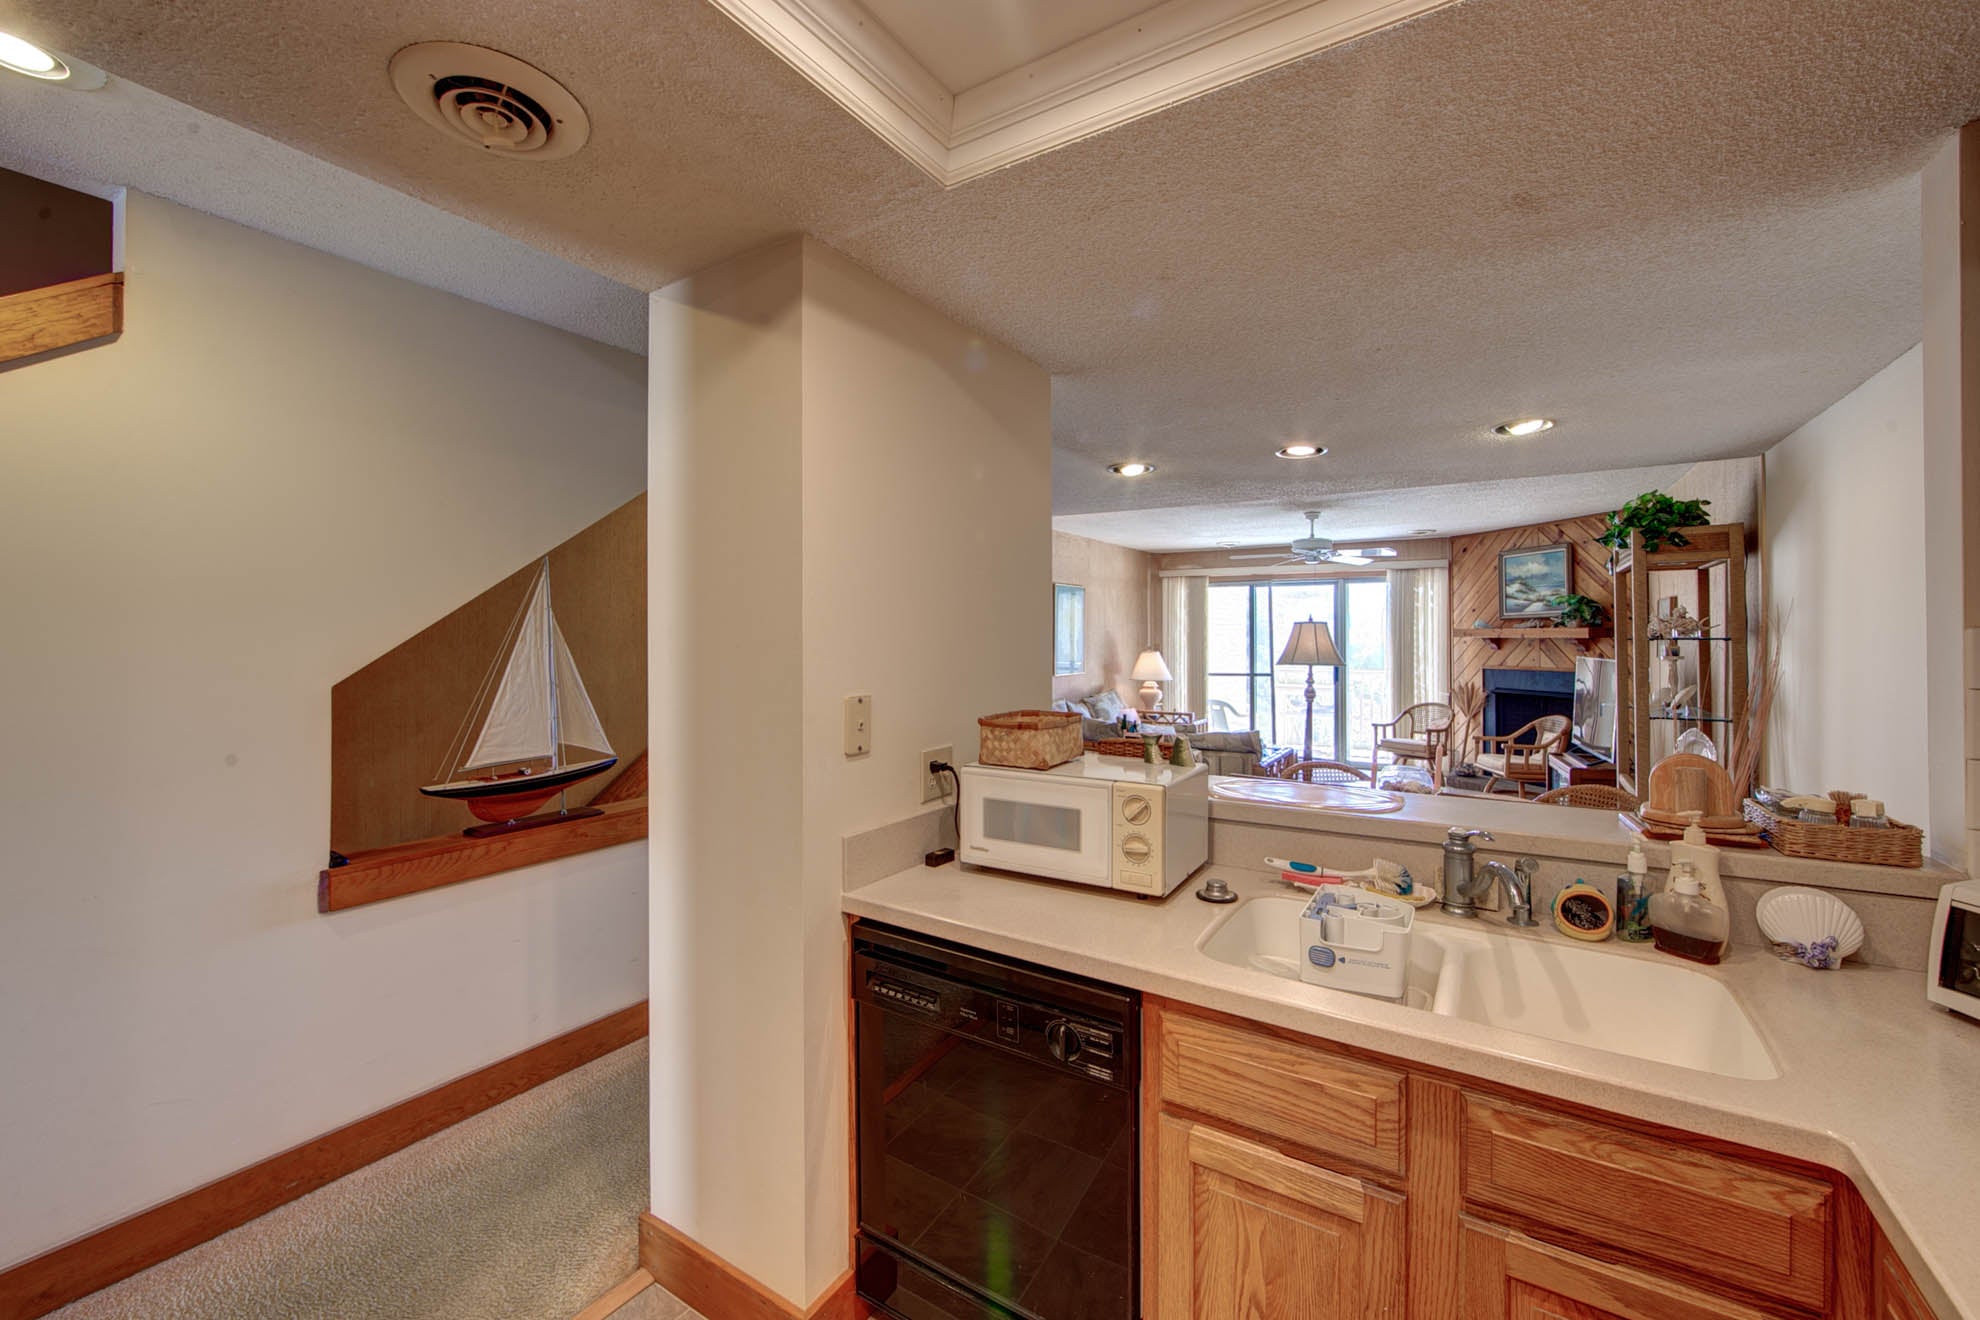 QB3: Beach Distraction | Mid Level Kitchen | Renovations Underway - New Photos Coming Soon!